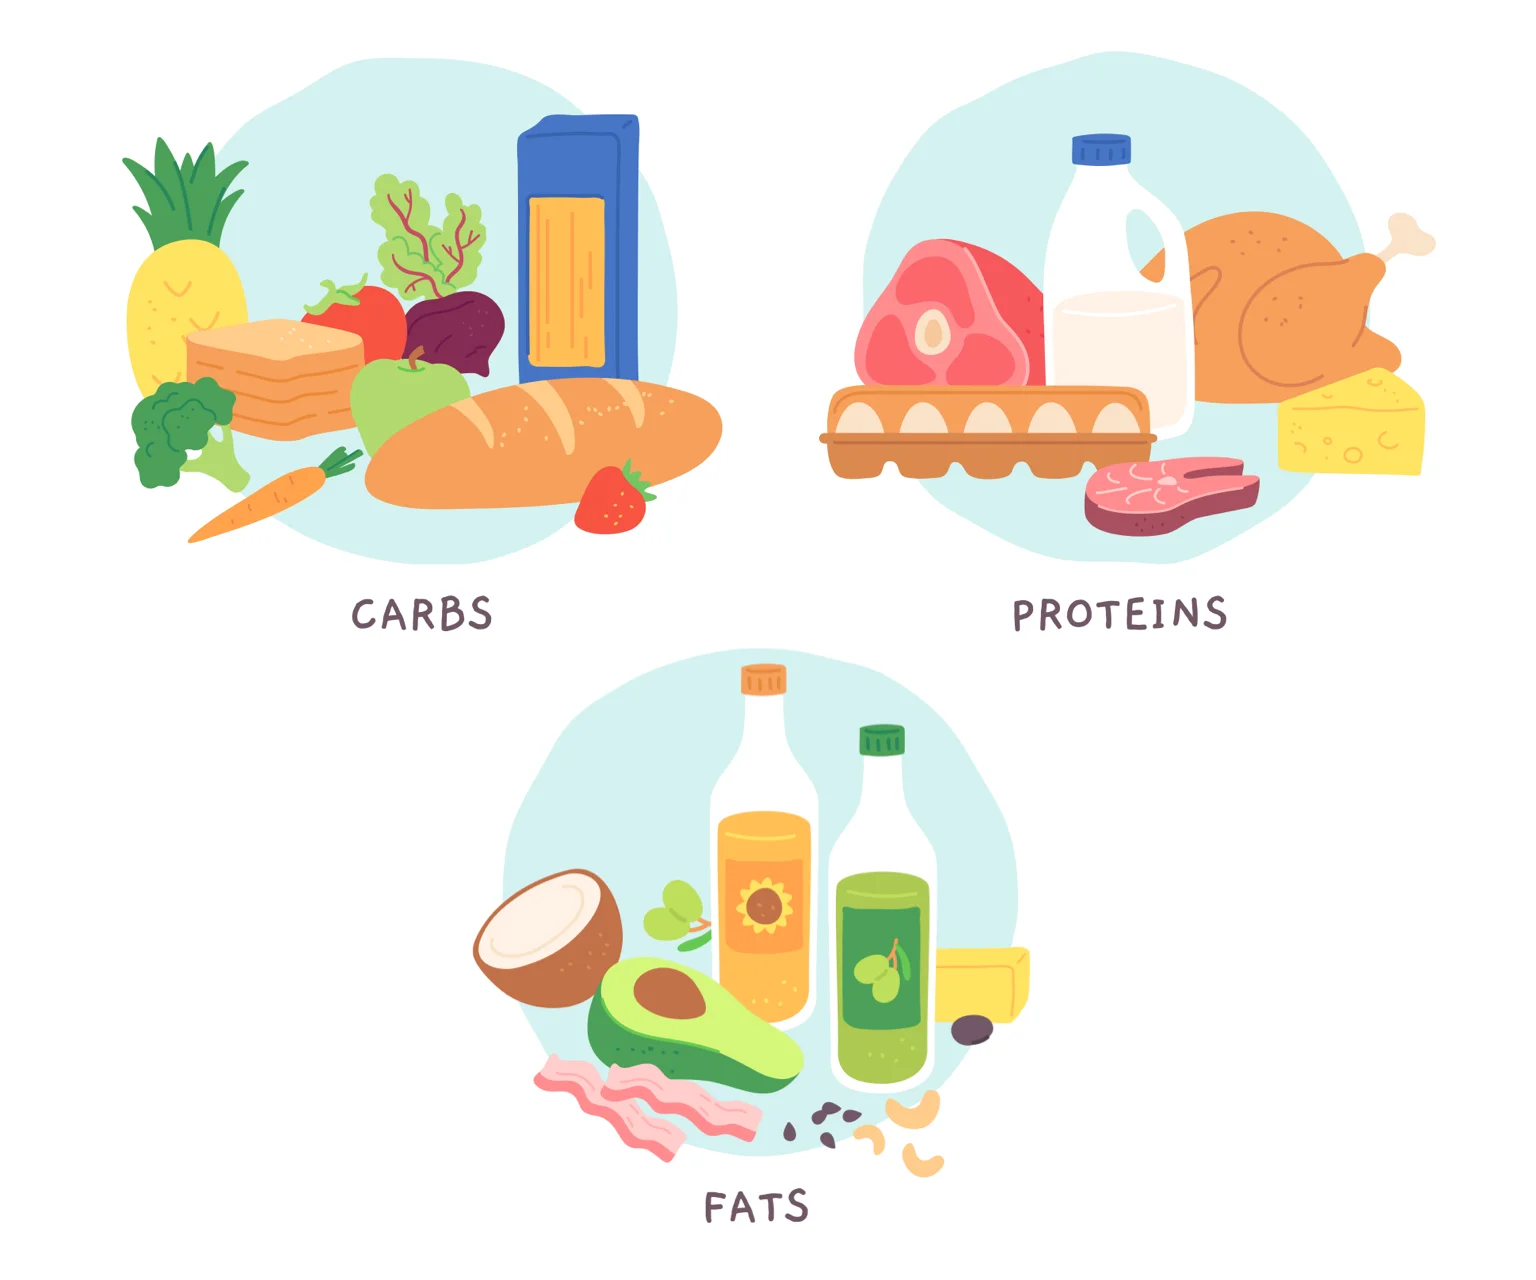 illustration - Showing the key macros - carbs, proteins and fats.